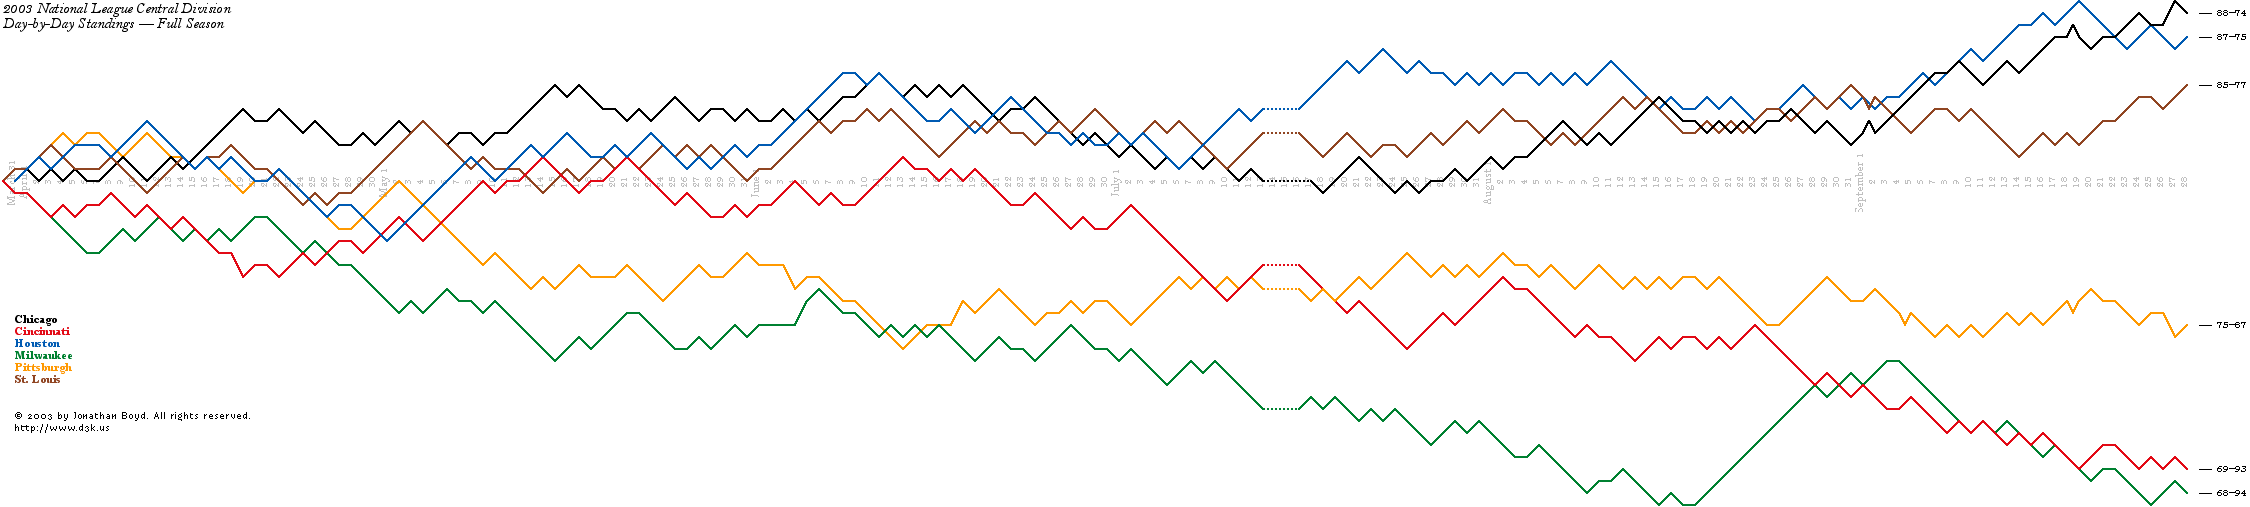 NL Central Division Standings with Wild Card